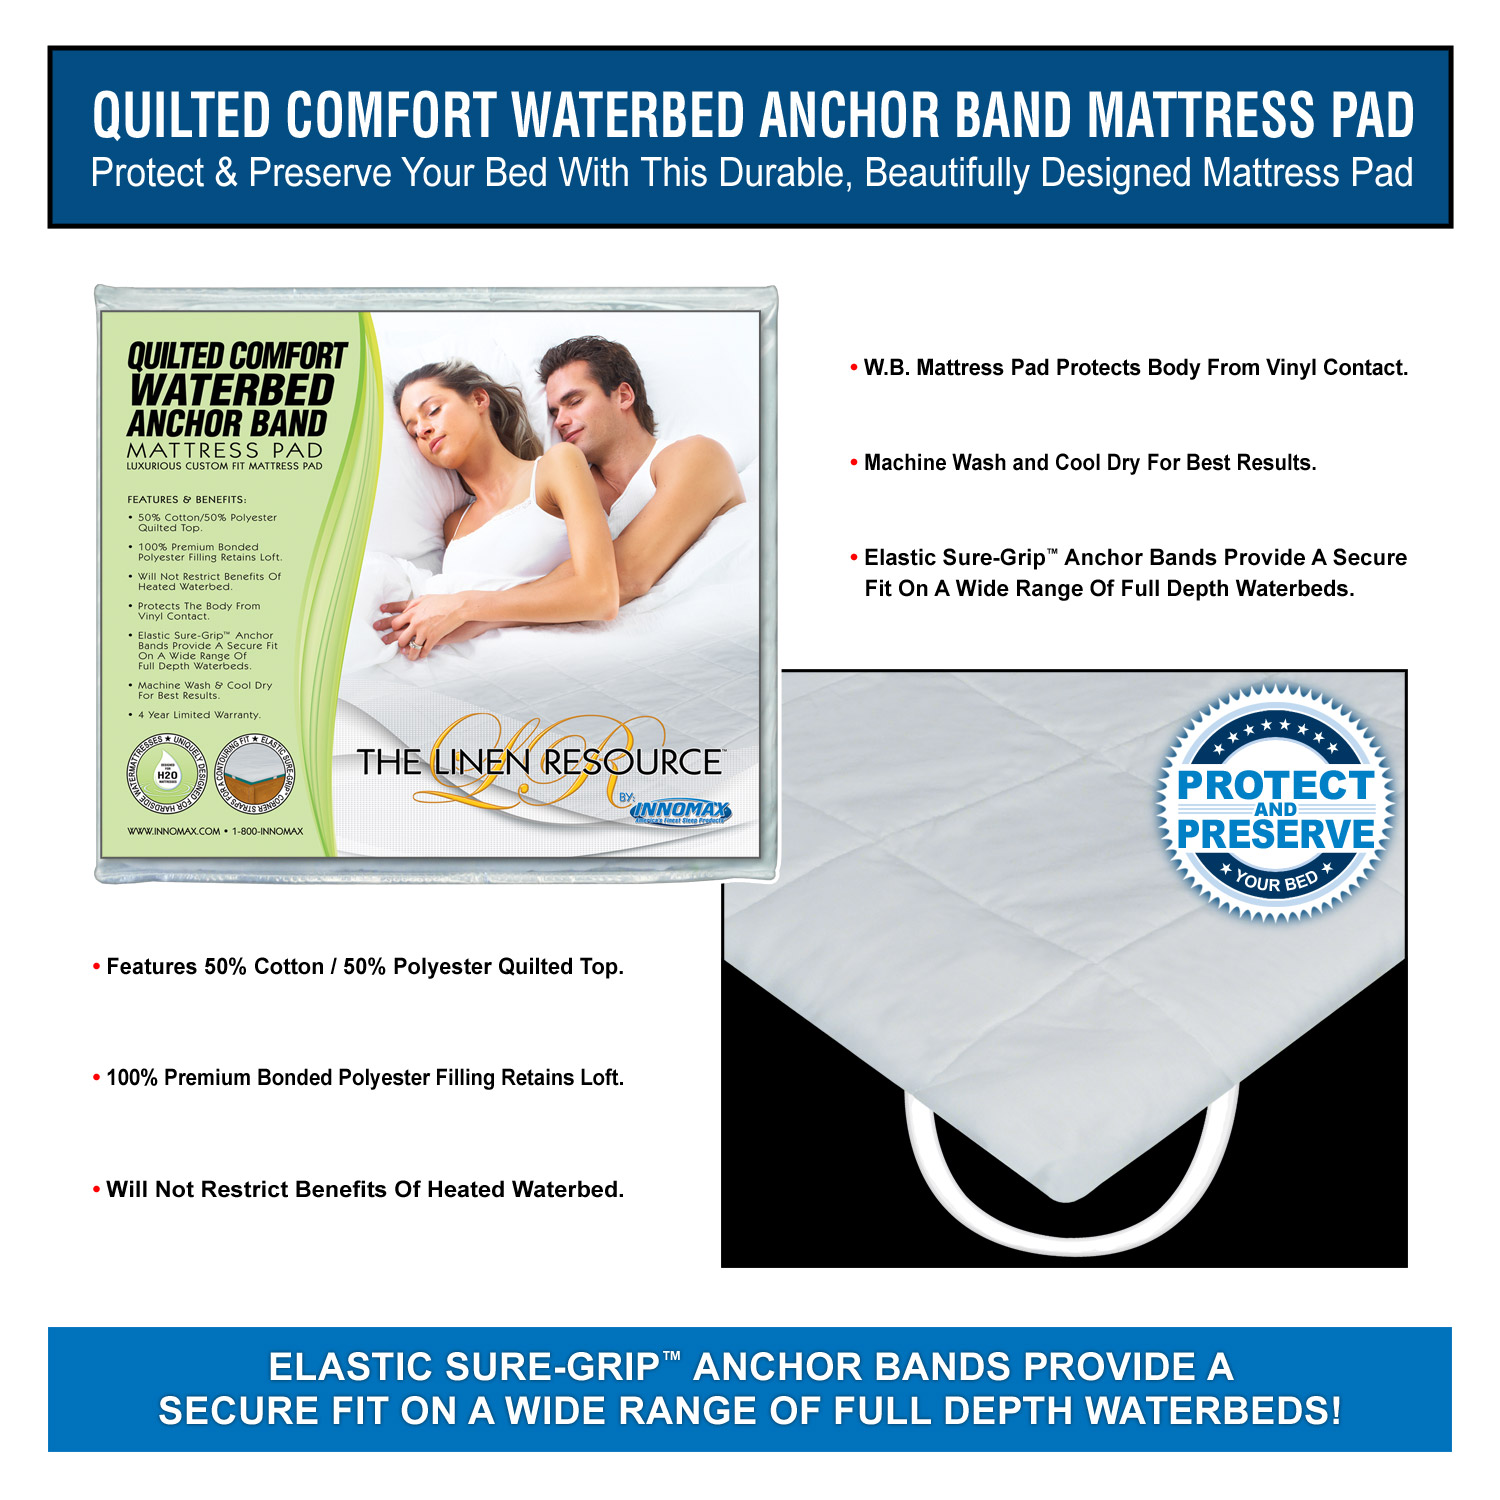 Reduced Motion Queen Size Hardside Waterbed Mattress